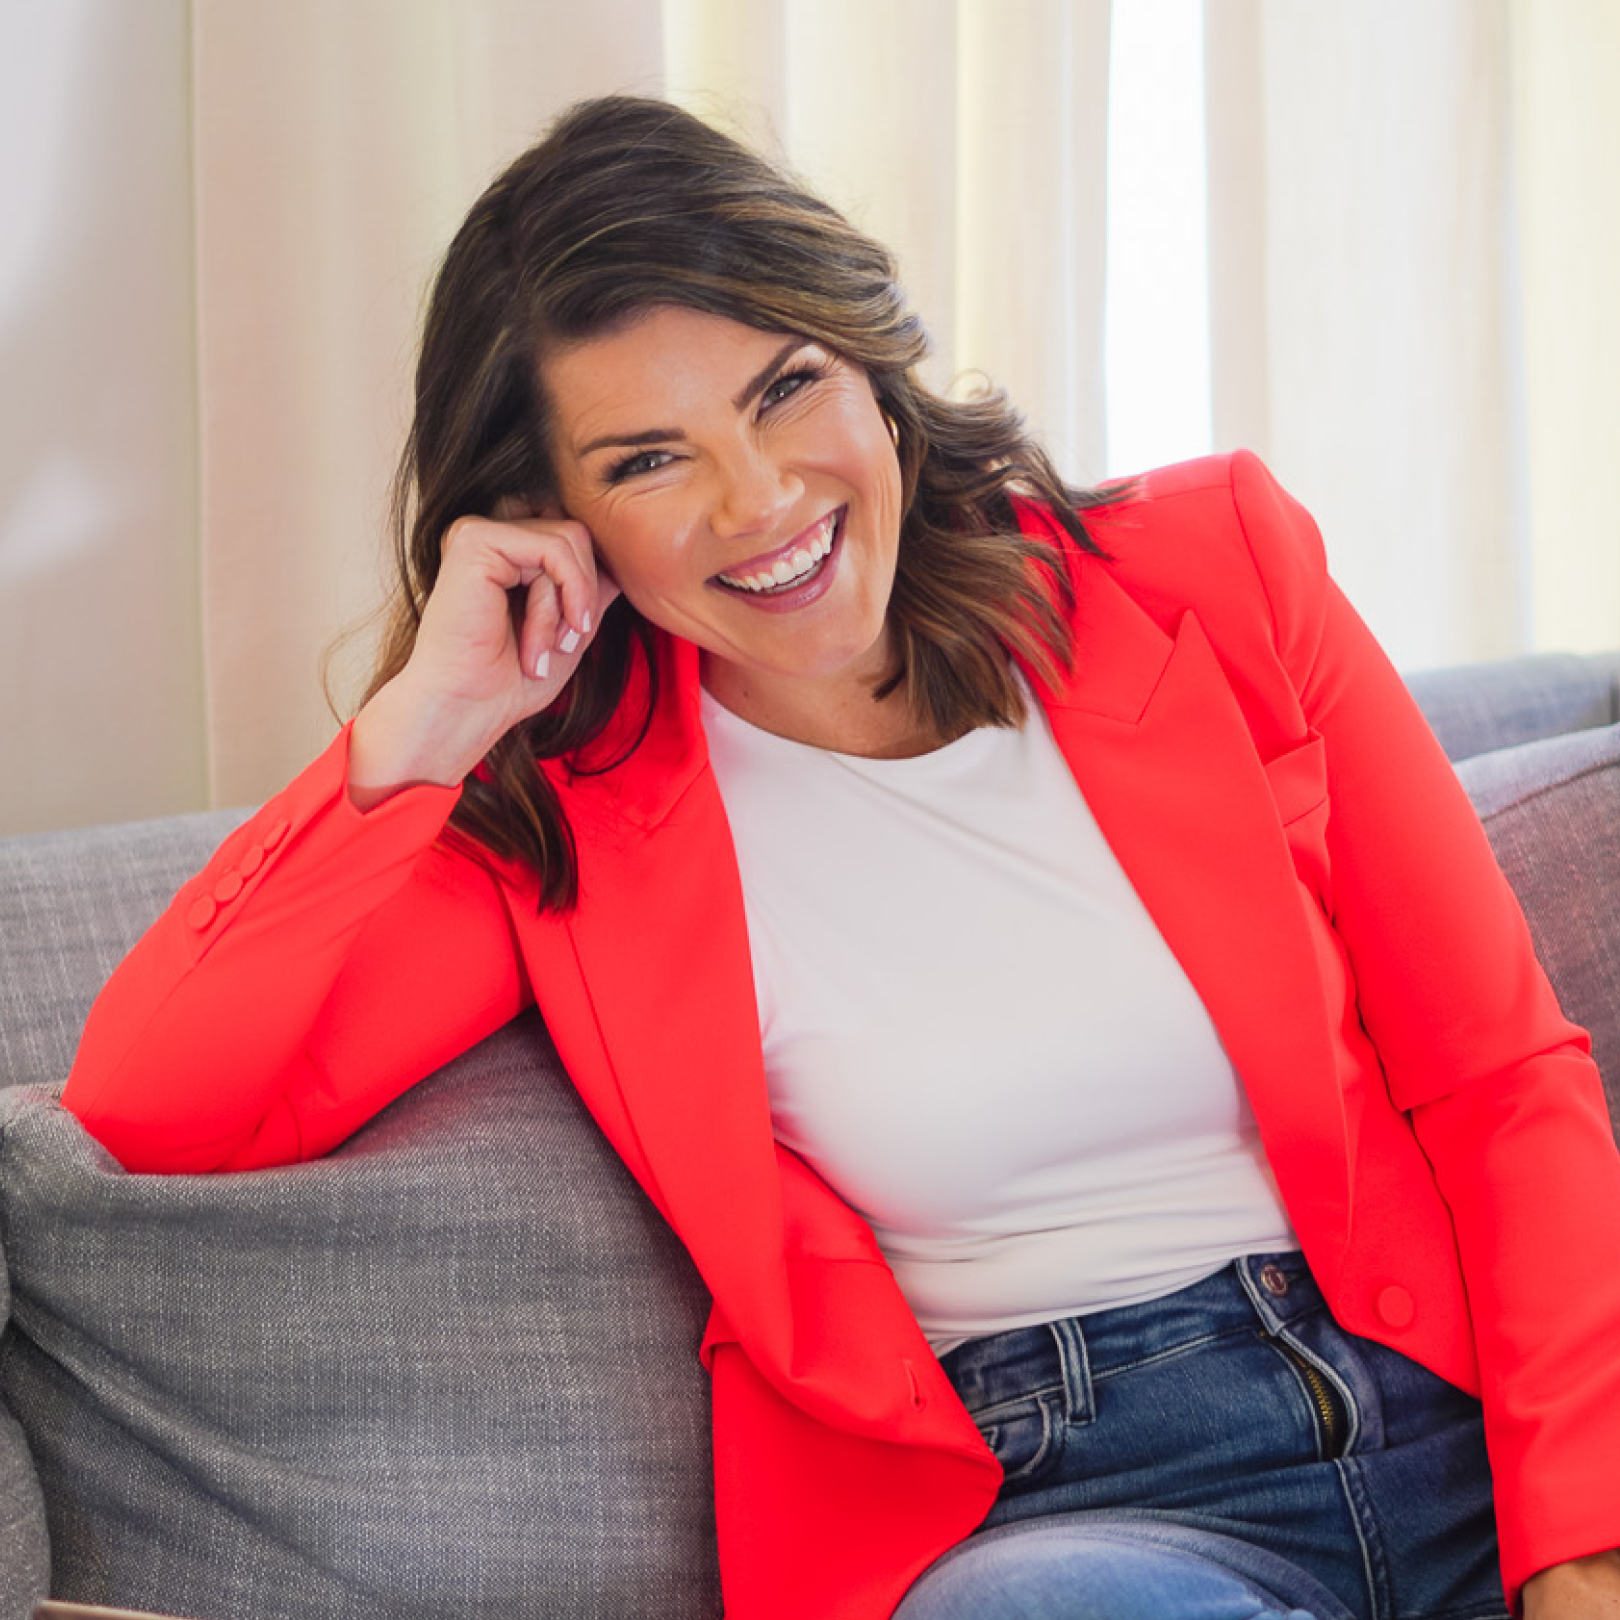 Woman in a red blazer and jeans smiling while seated on a gray couch.